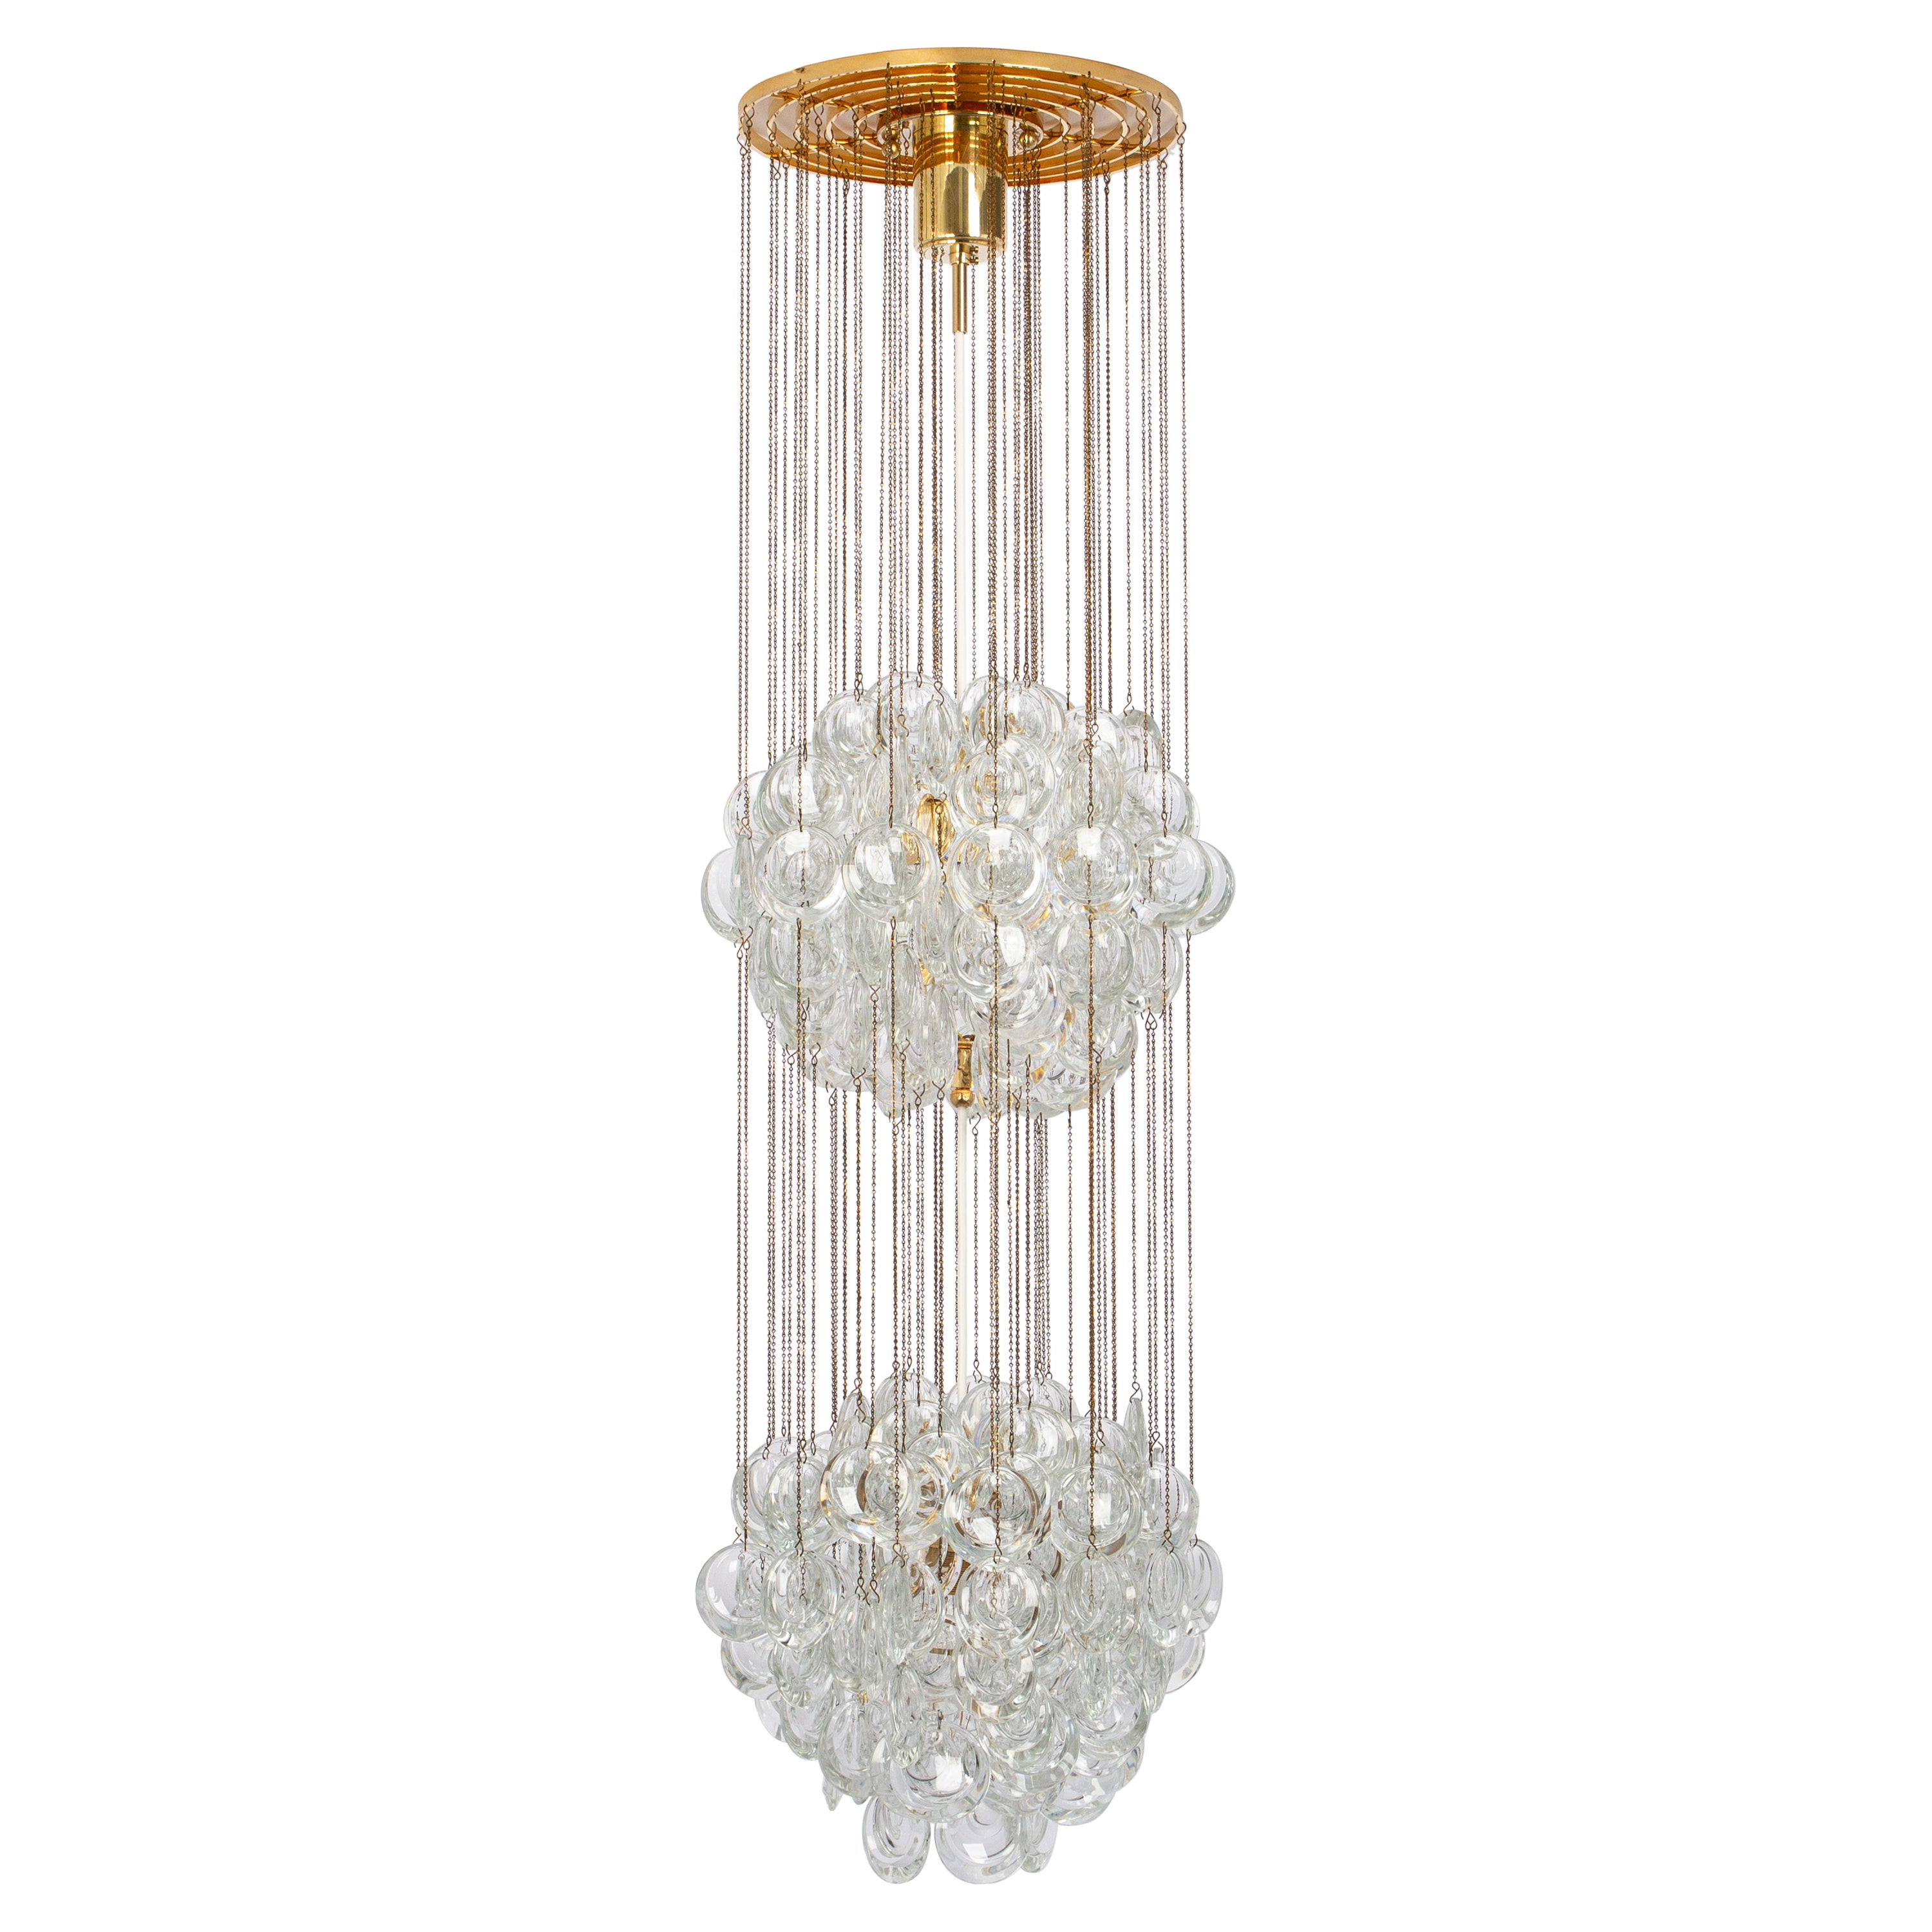 Delicate Gilt Brass Crystal Chandelier by Palwa, Sciolari Design, Germany, 1970s For Sale